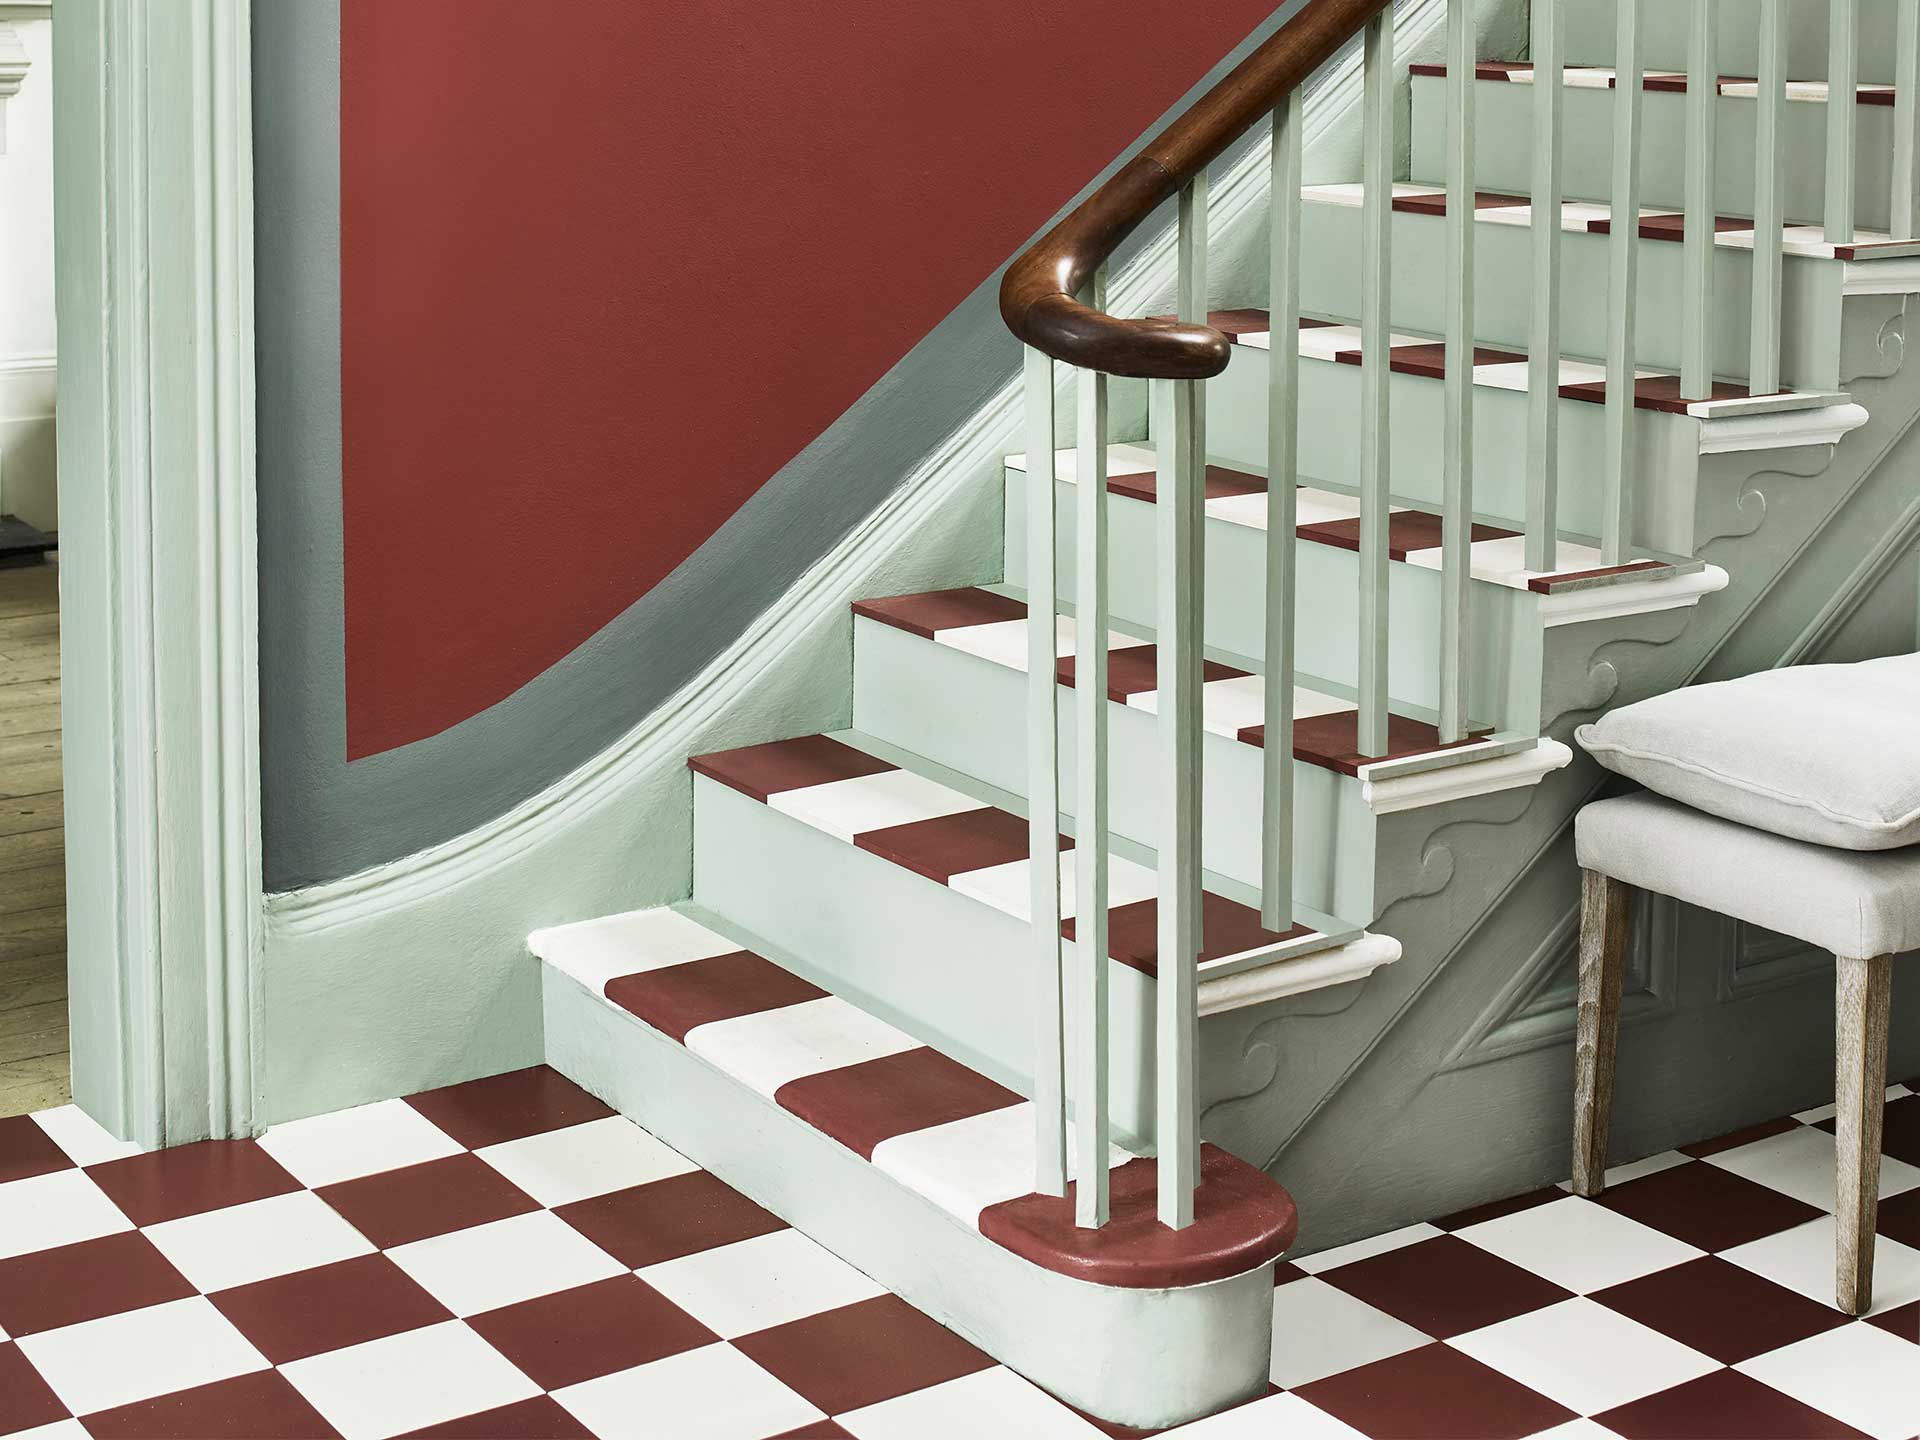 Try Annie Sloan's chequerboard painted stair decorating idea on the treads